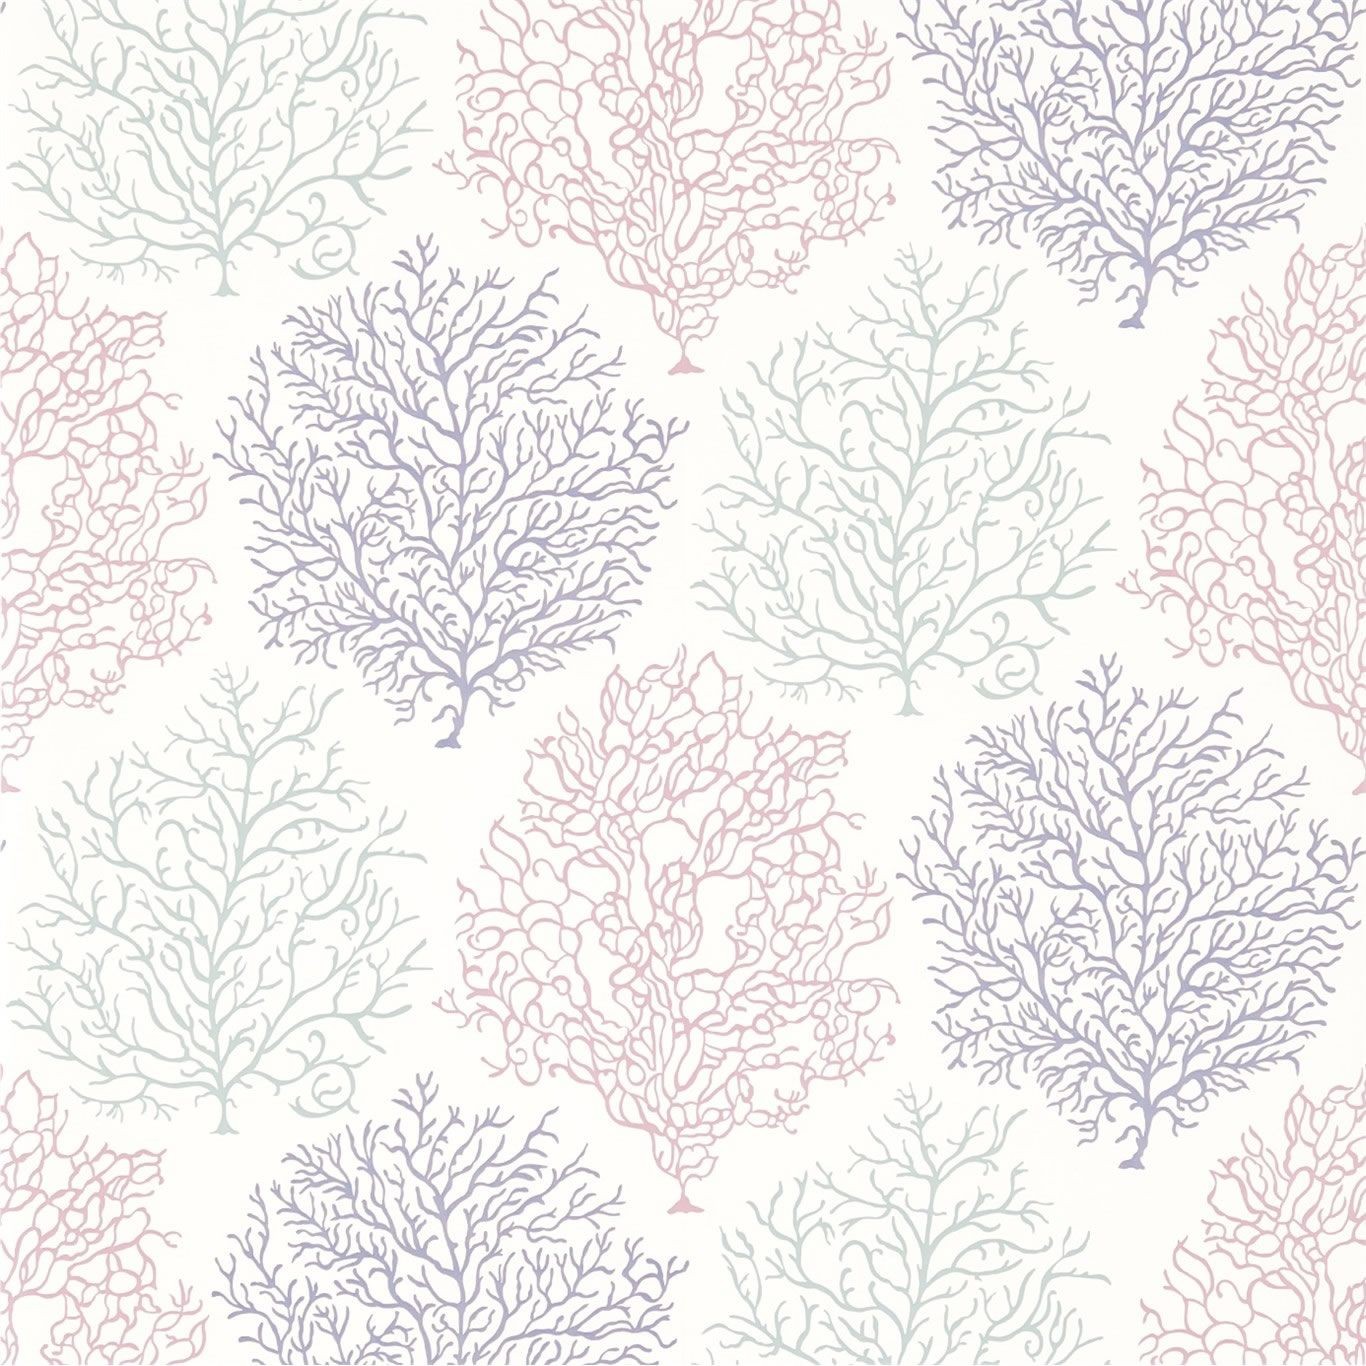 Teal Mauve   213392   Coral Reef   Voyage of Discovery   Sanderson